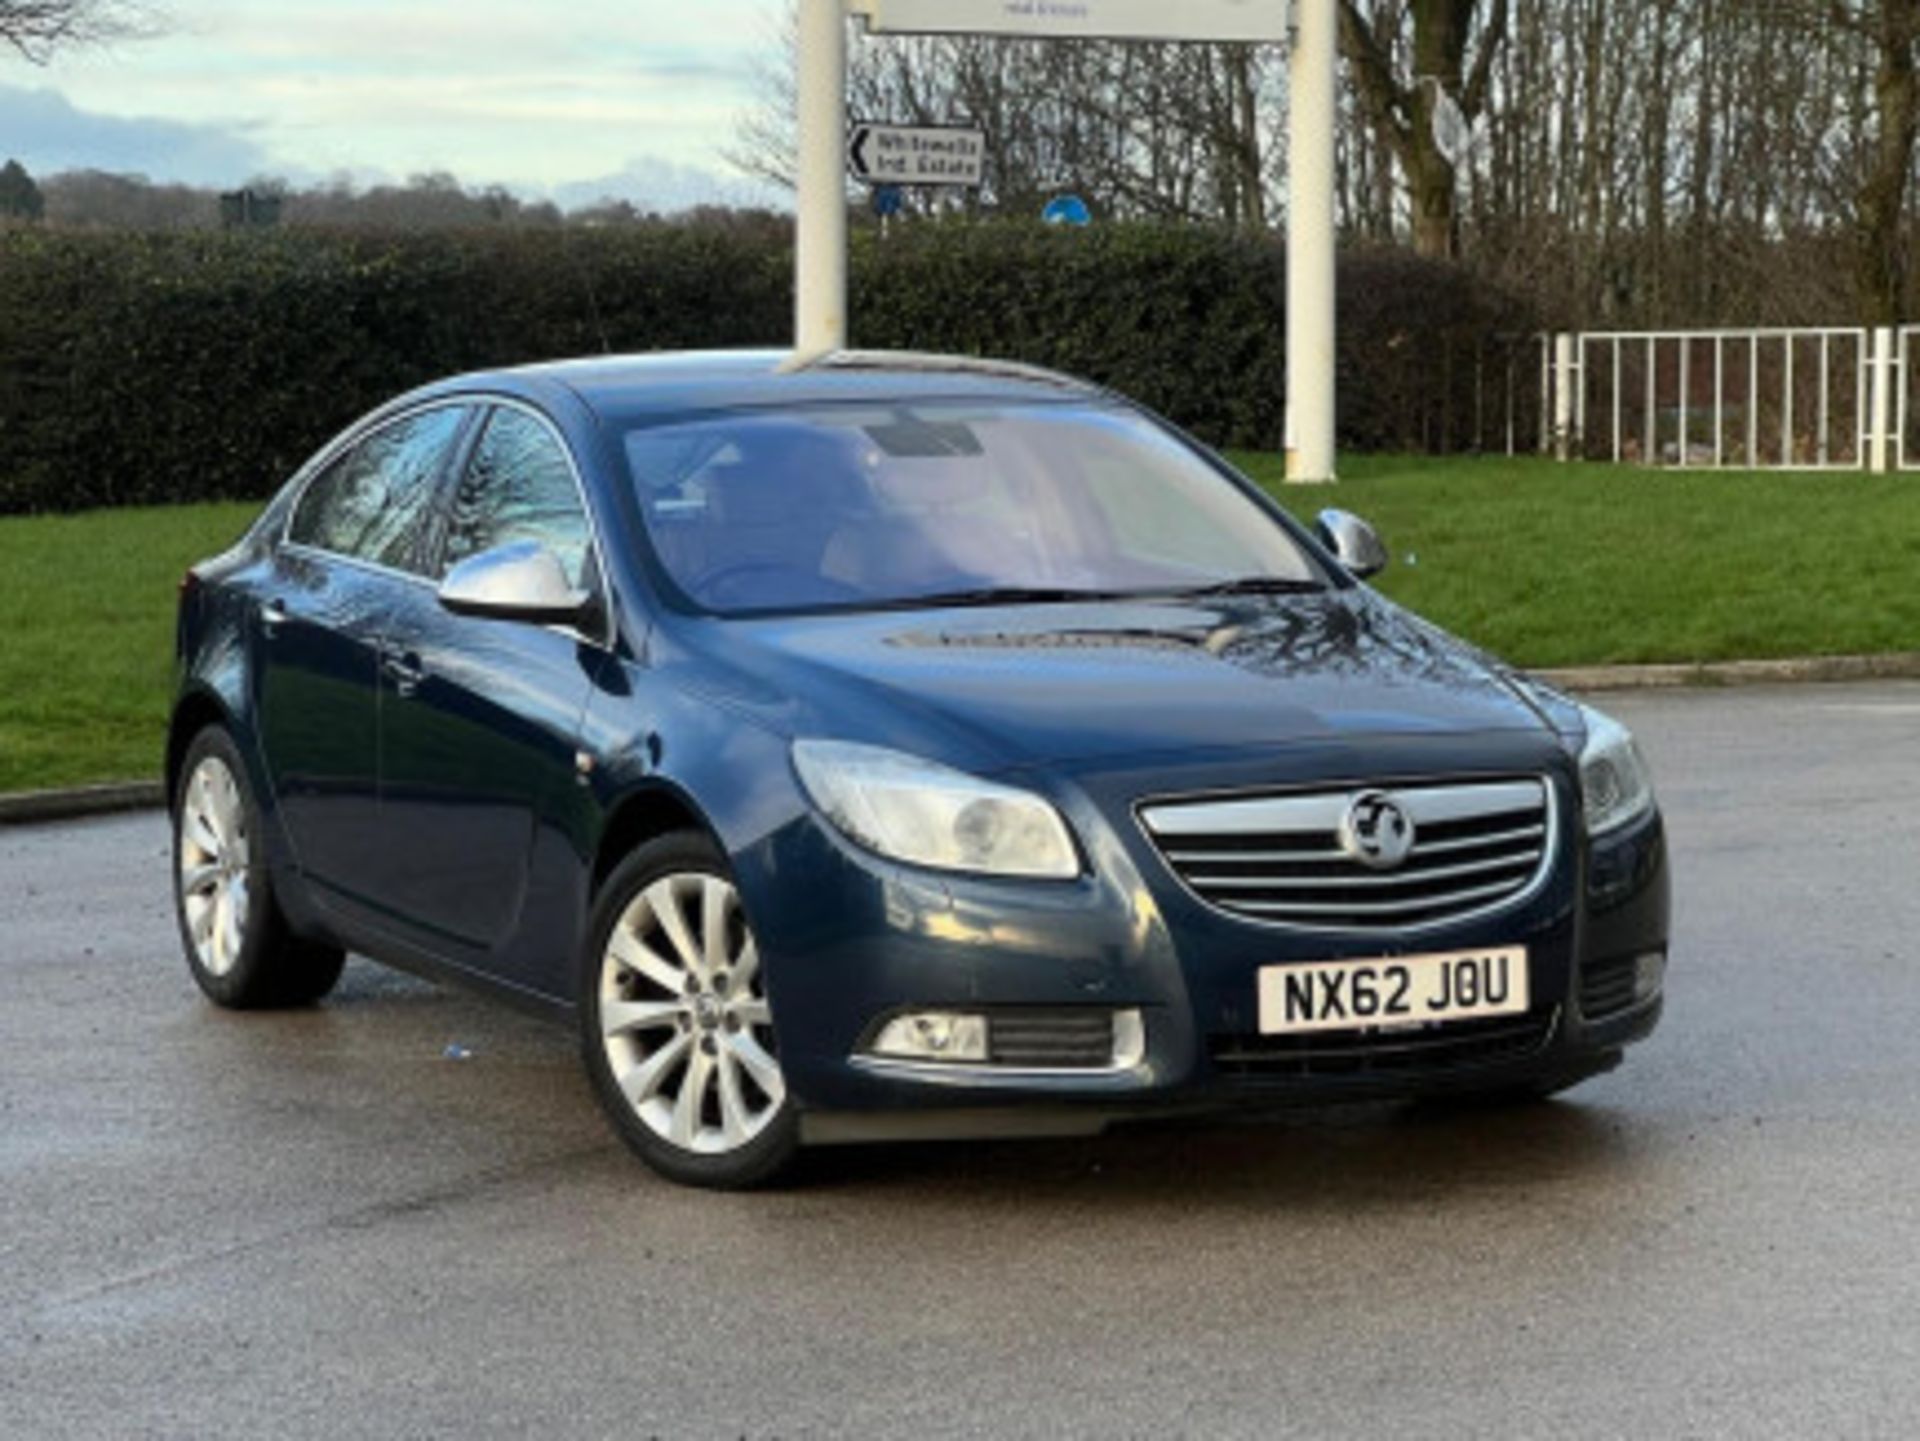 2012 VAUXHALL INSIGNIA 2.0 CDTI ELITE AUTO EURO 5 - DISCOVER EXCELLENCE >>--NO VAT ON HAMMER--<< - Image 58 of 120